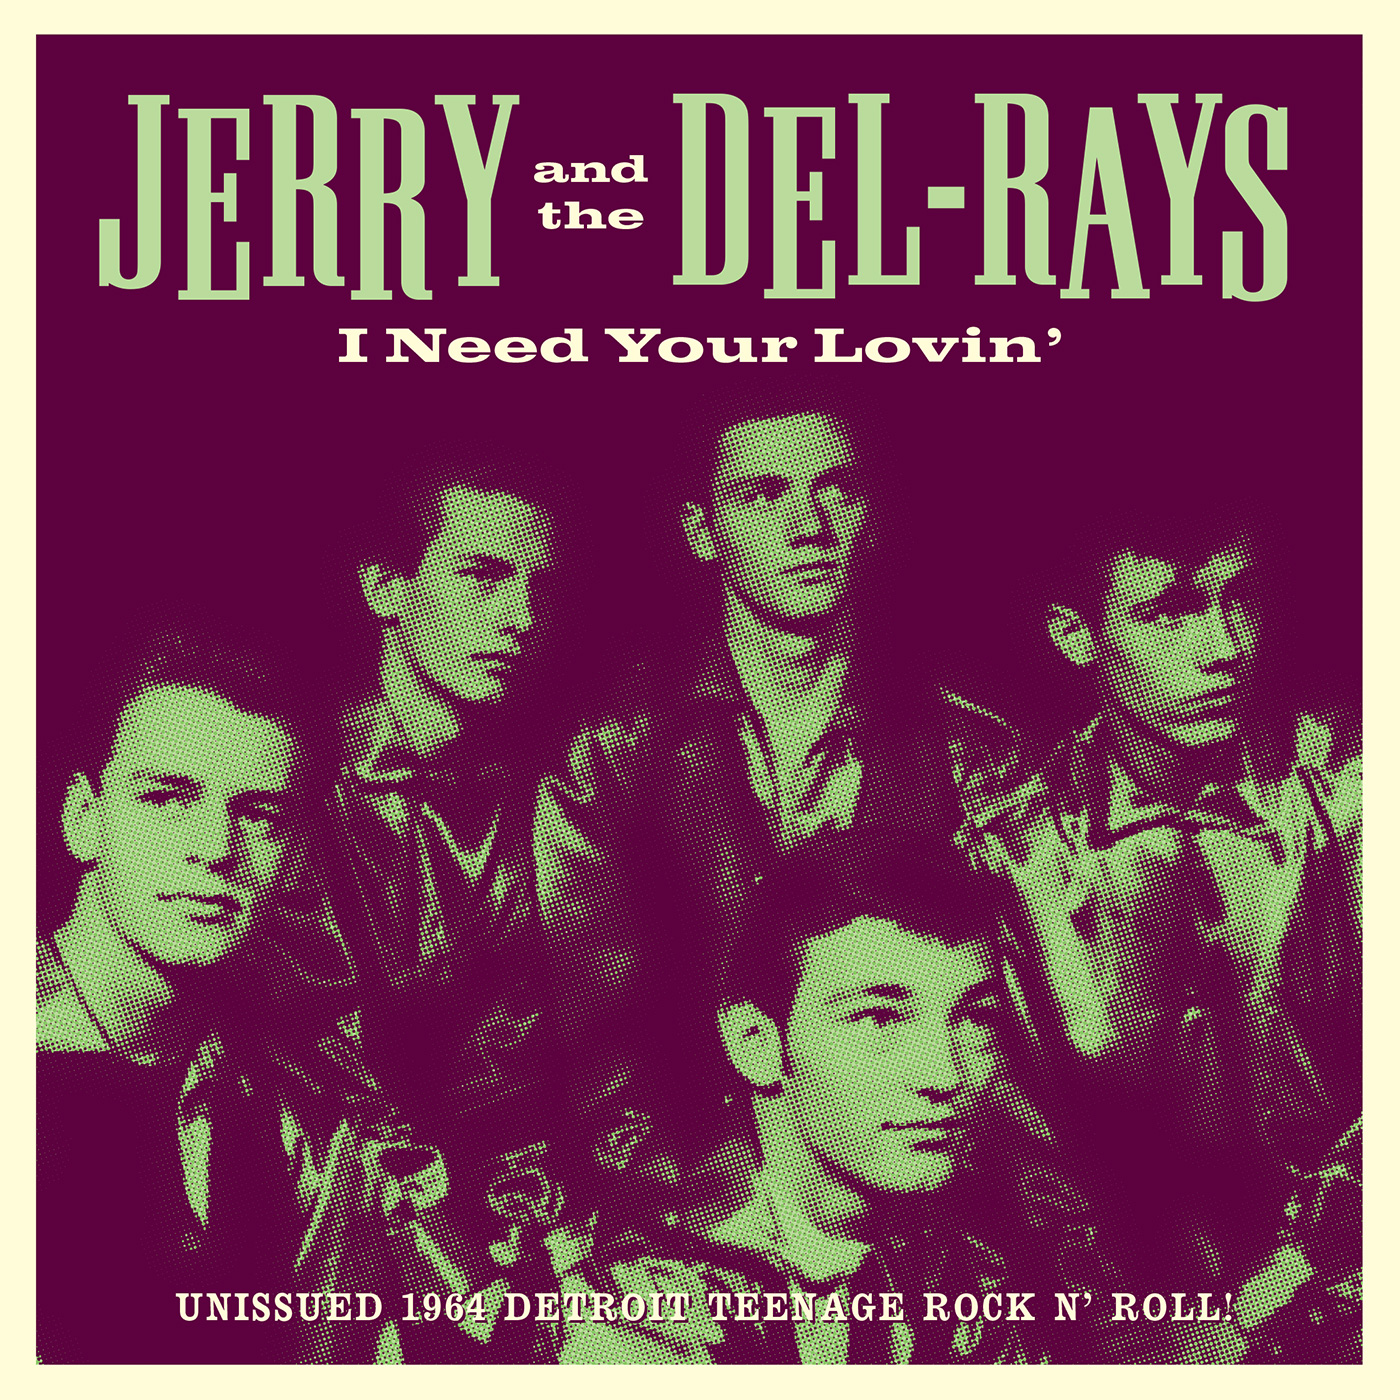 Jerry and the Del-Rays - I Need Your Lovin' 45 sleeve